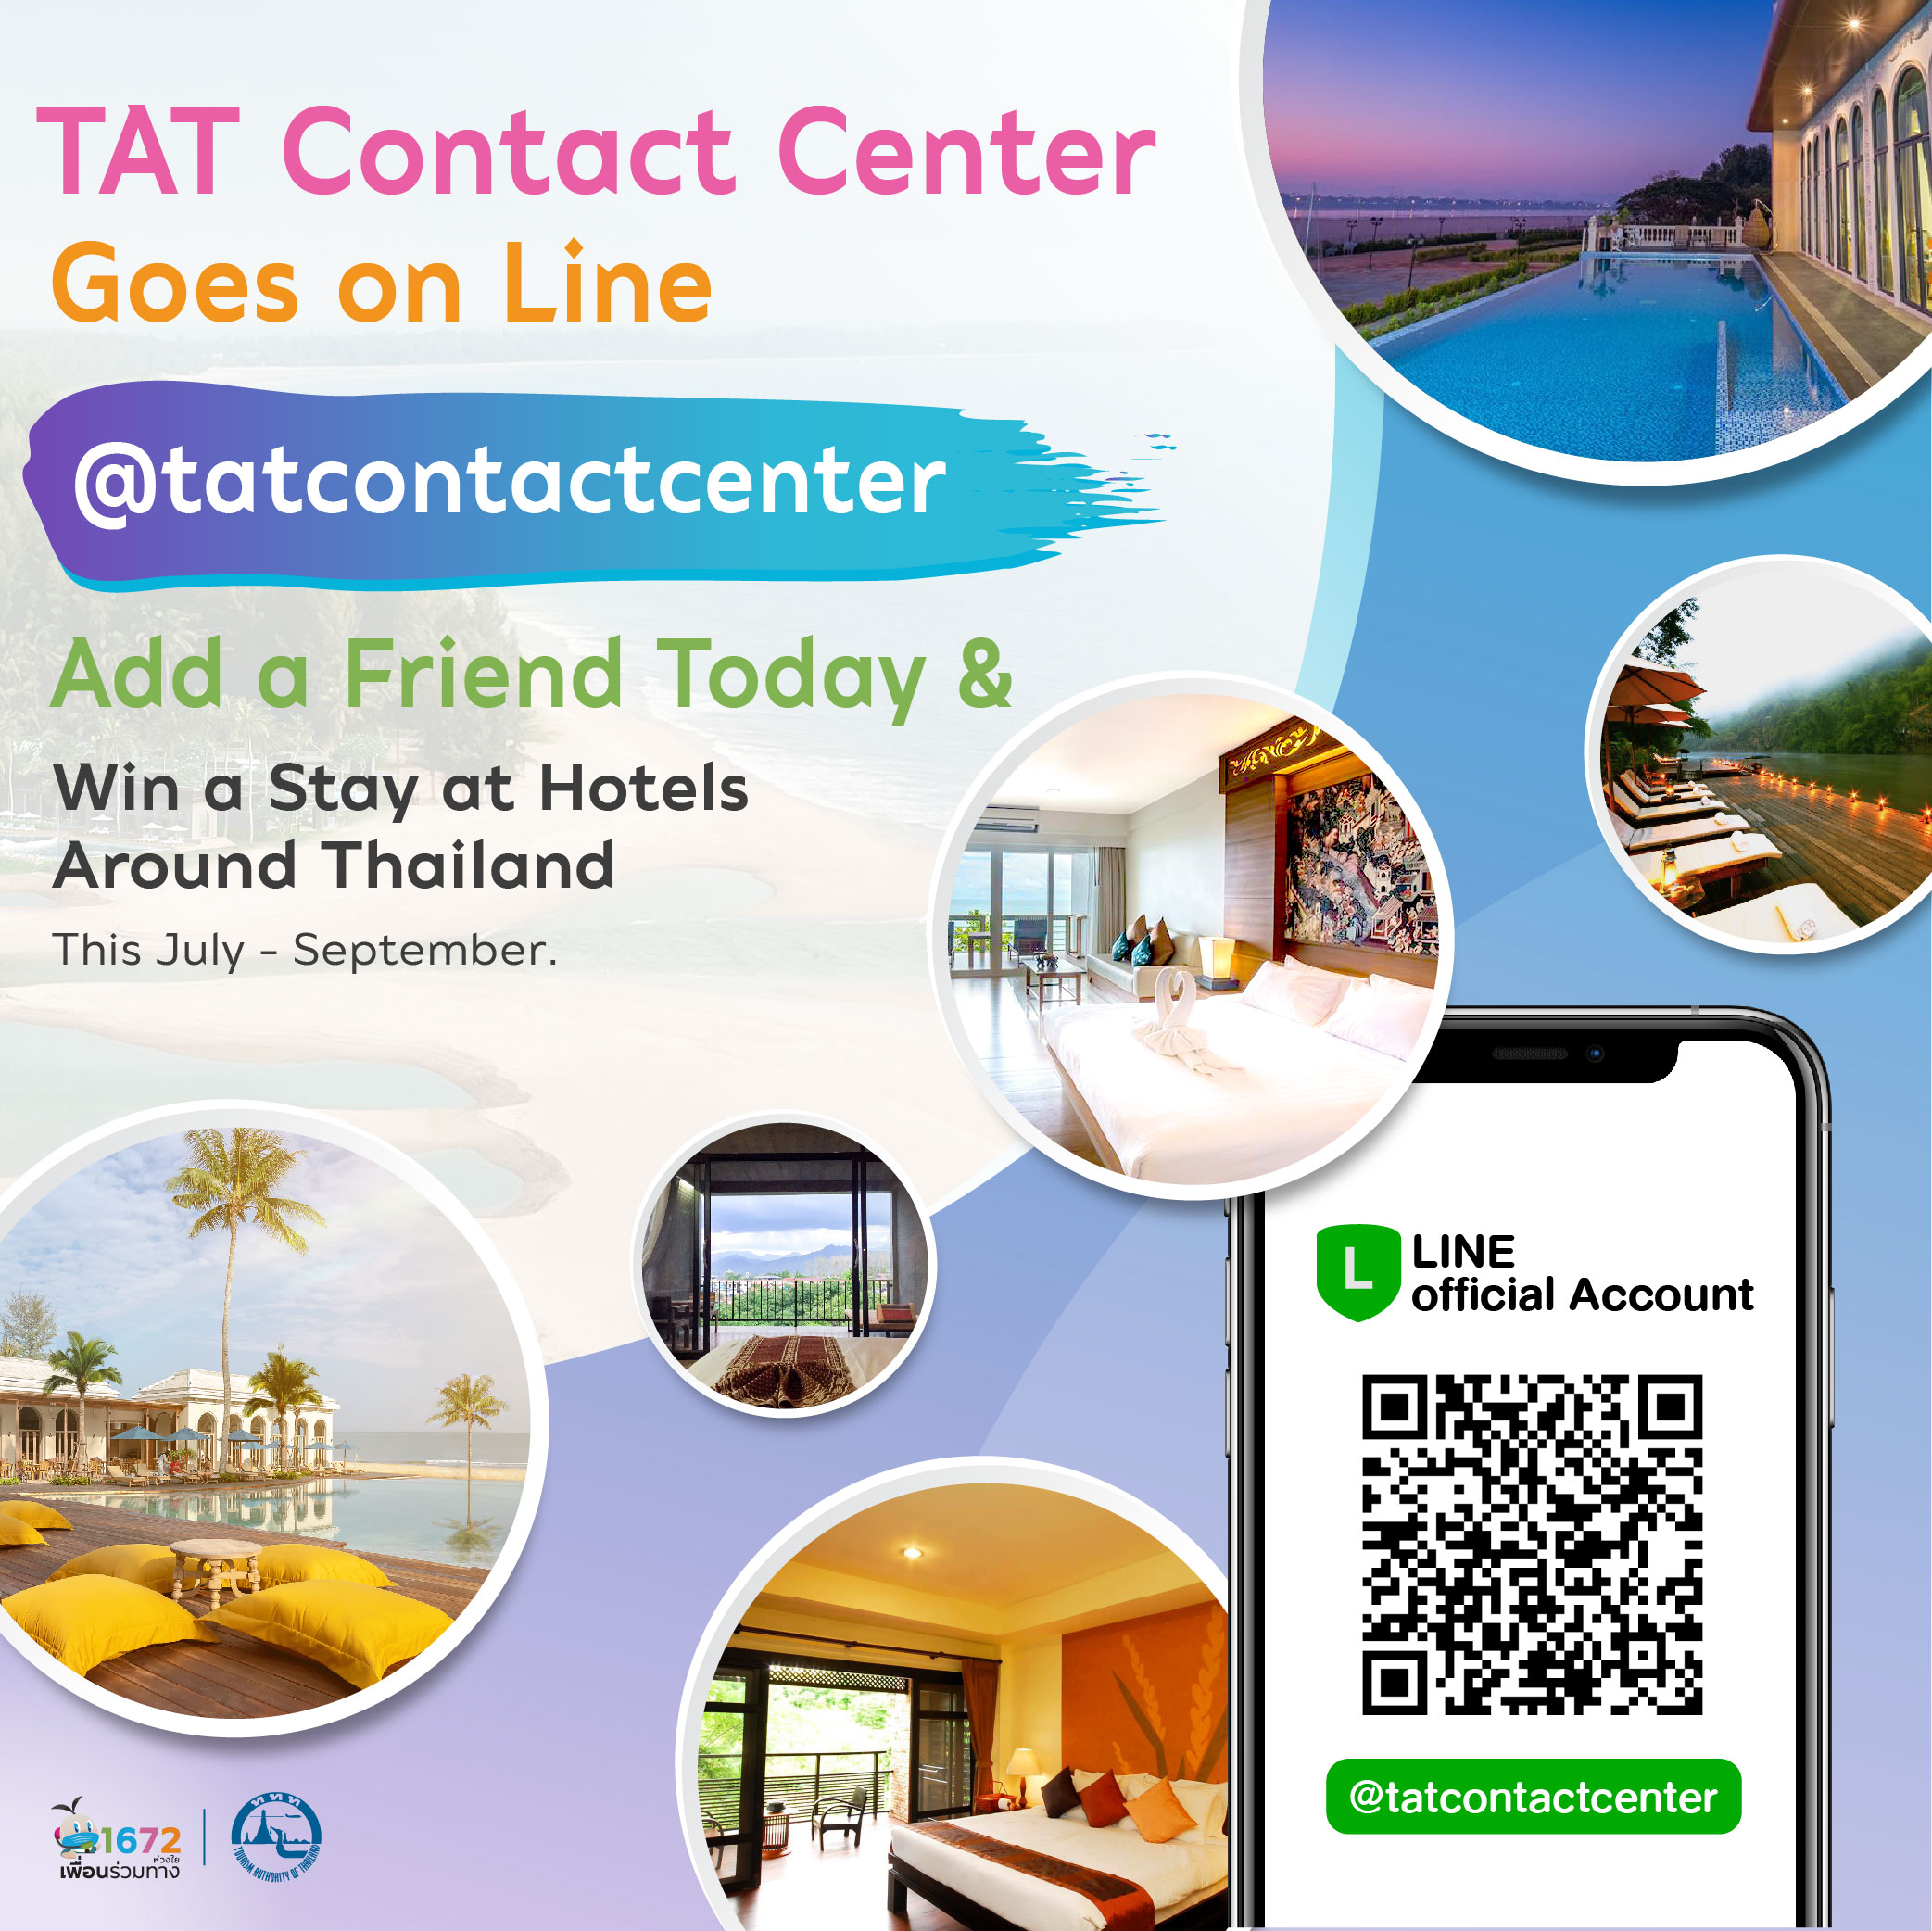 TAT Contact Center Goes on Line @tatcontactcenter. Add a Friend Today & Win a Stay at Hotels Around Thailand This July - September.